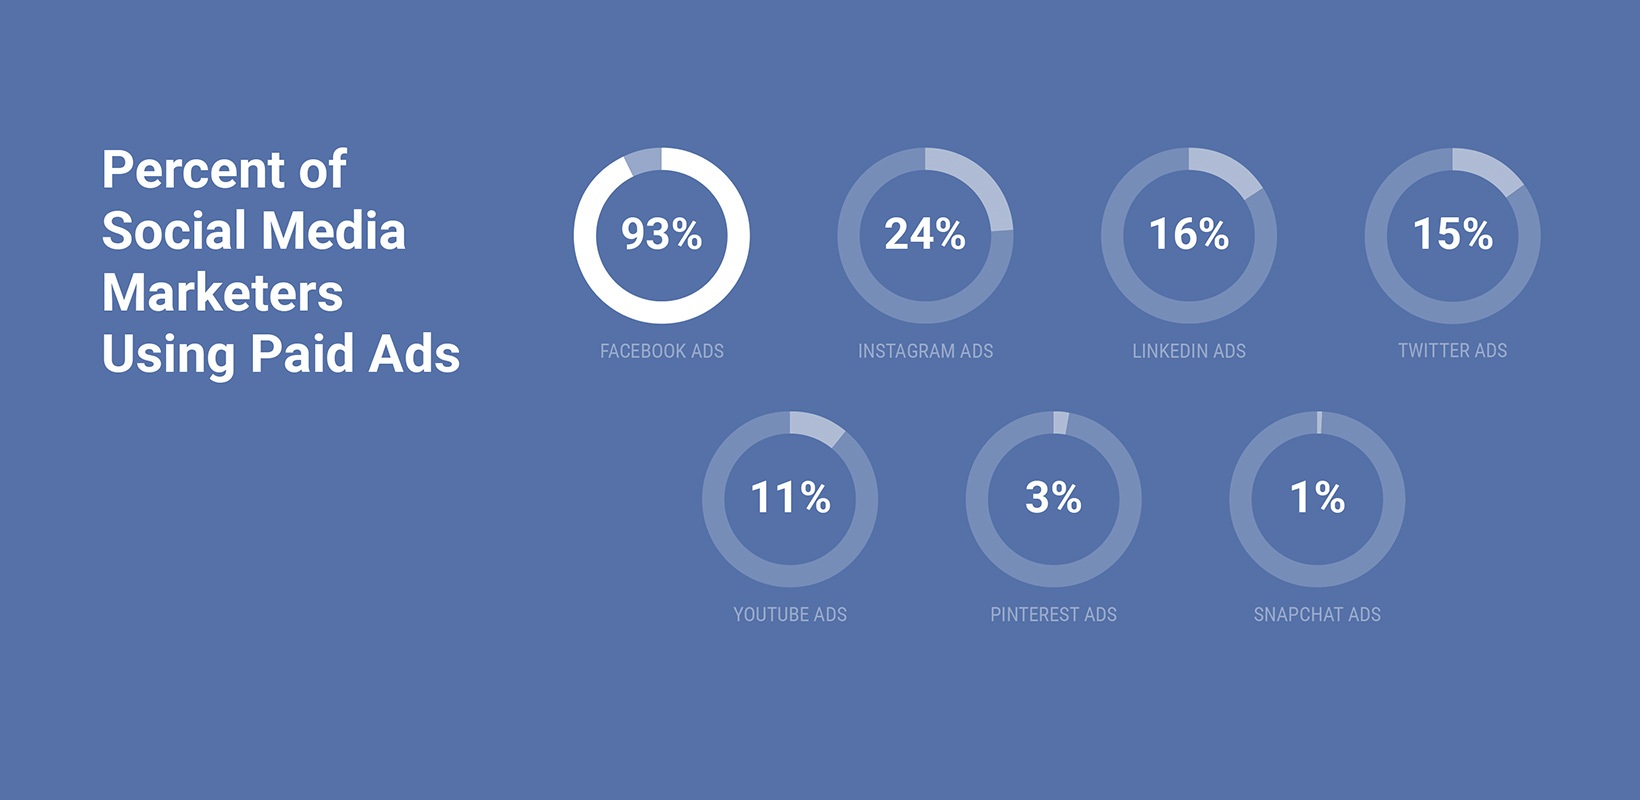 Social media marketers are more likely to use facebook than any other paid ad type